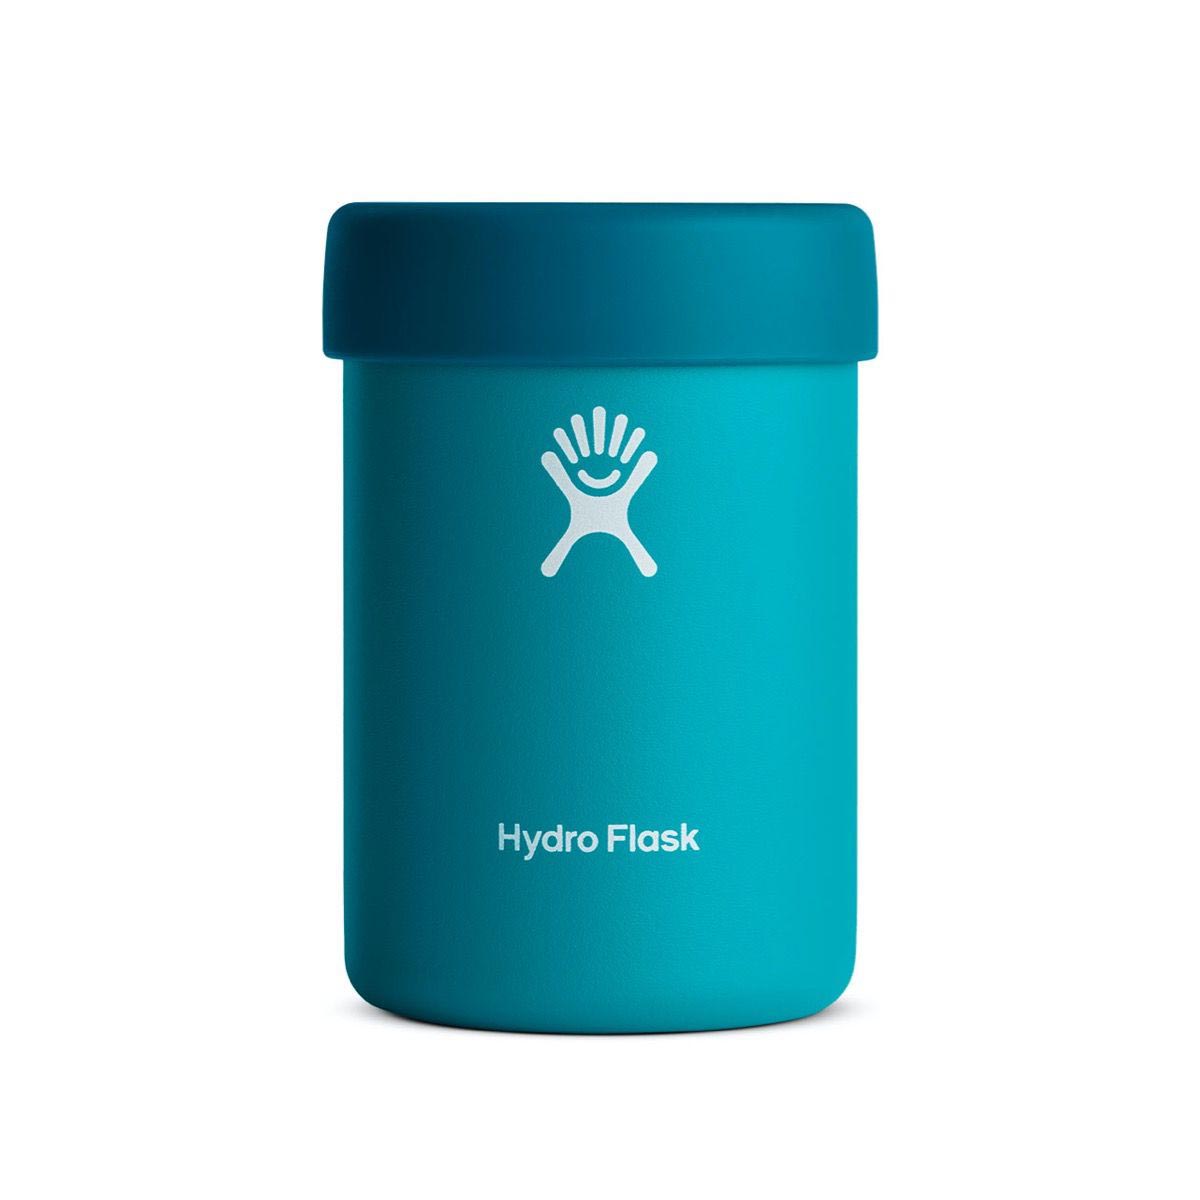 Hydro Flask 12 Ounce Cooler Cup